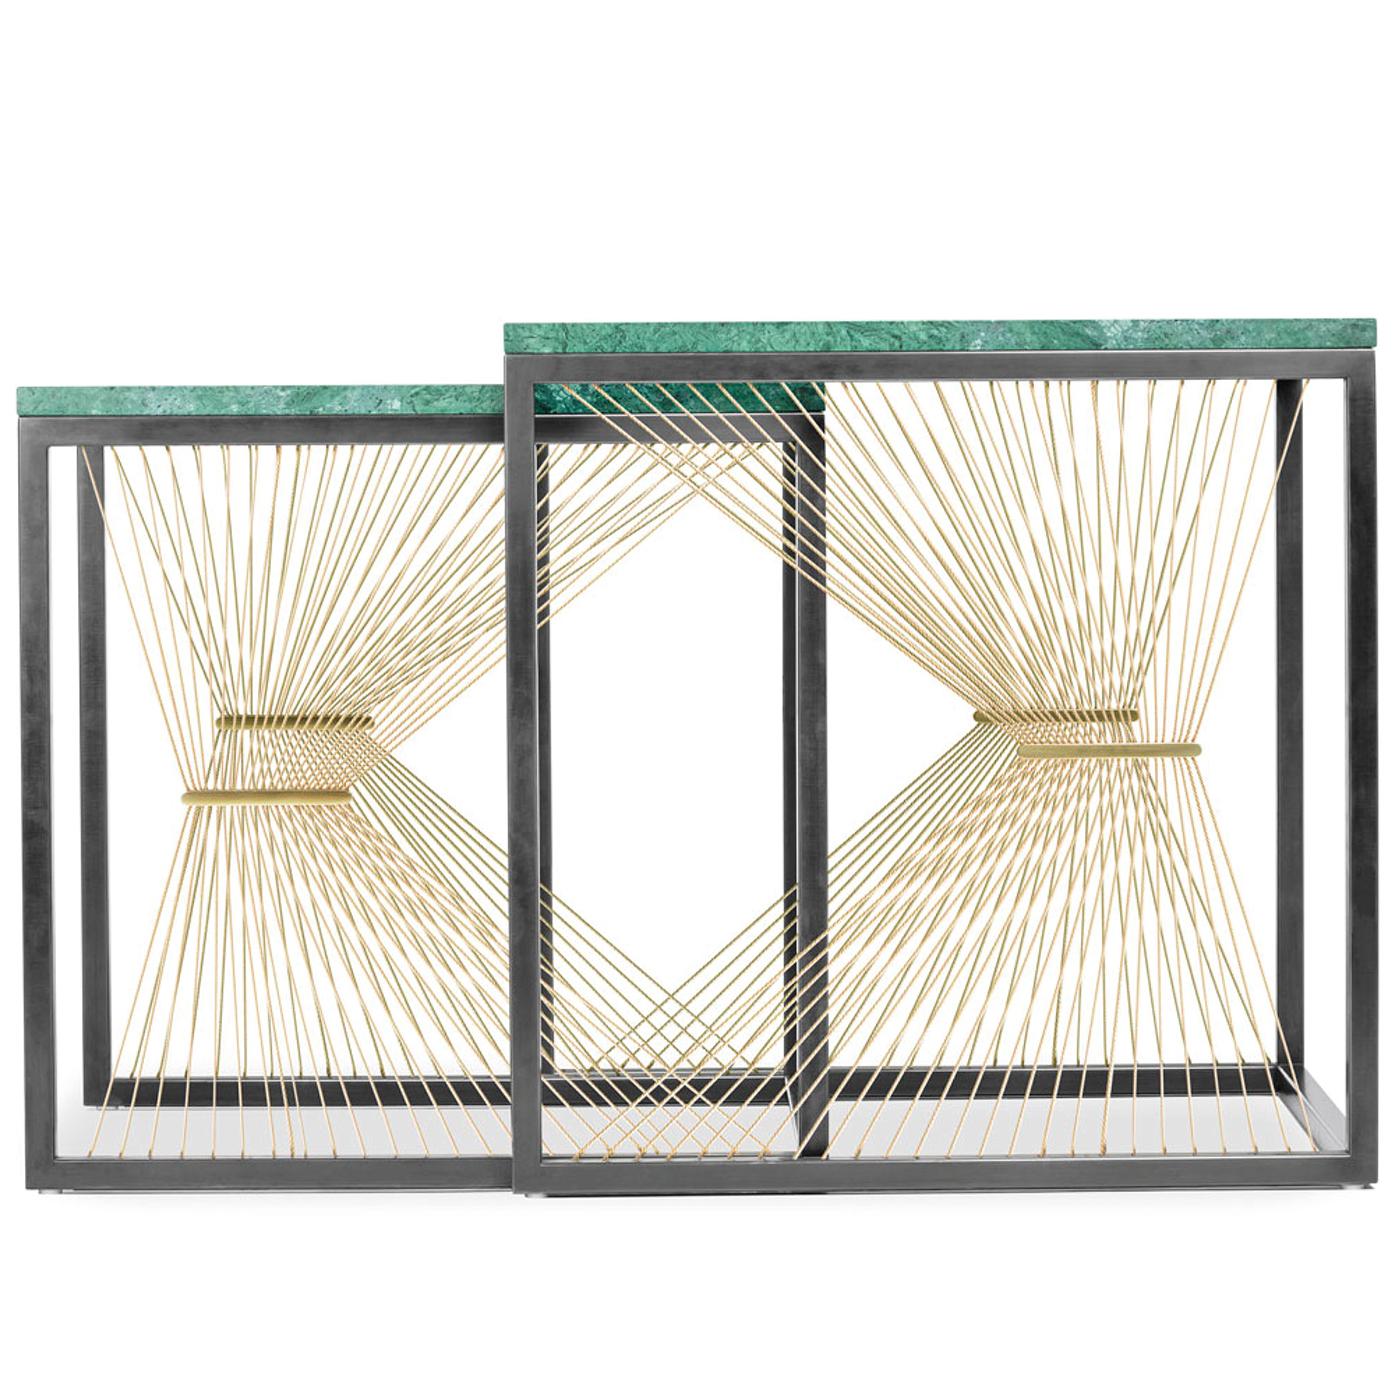 The elegant simplicity of this contemporary set of two nesting tables disguises a complex construction. An open blackened steel structure supports the green Guatemala marble tops, while on the sides gilded steel wires are held by polished brass